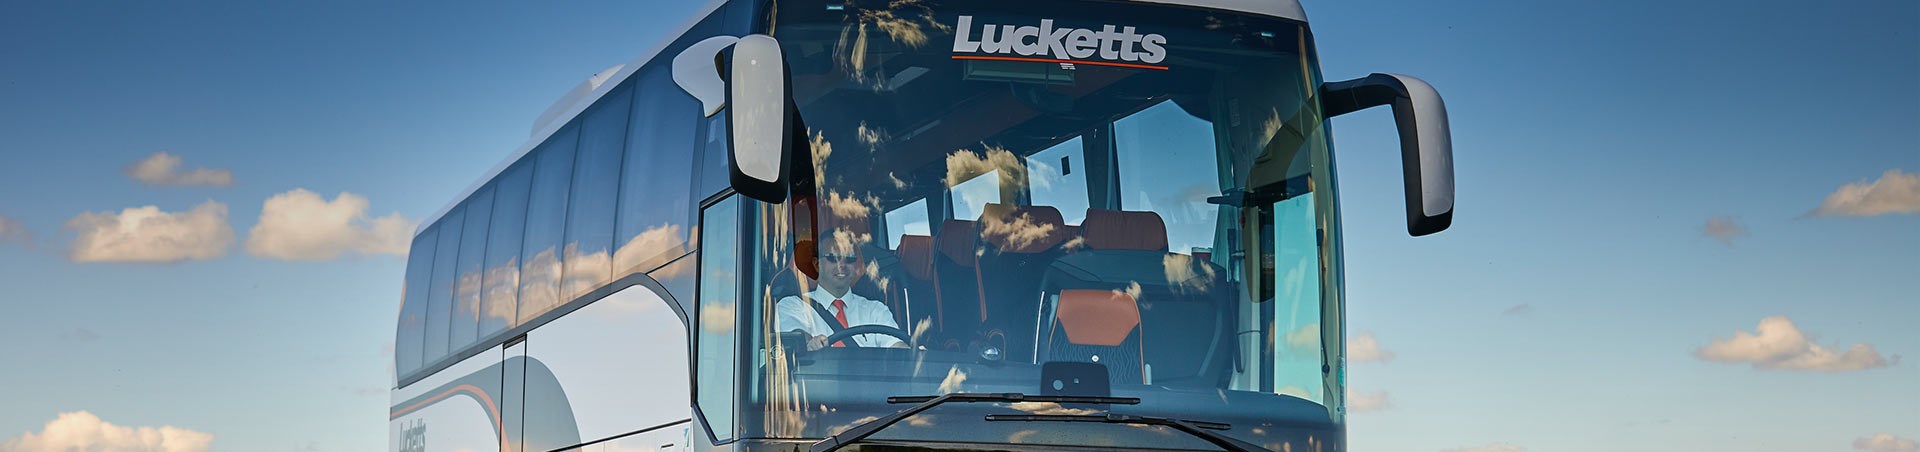 Lucketts Travel coach on private hire in Fareham